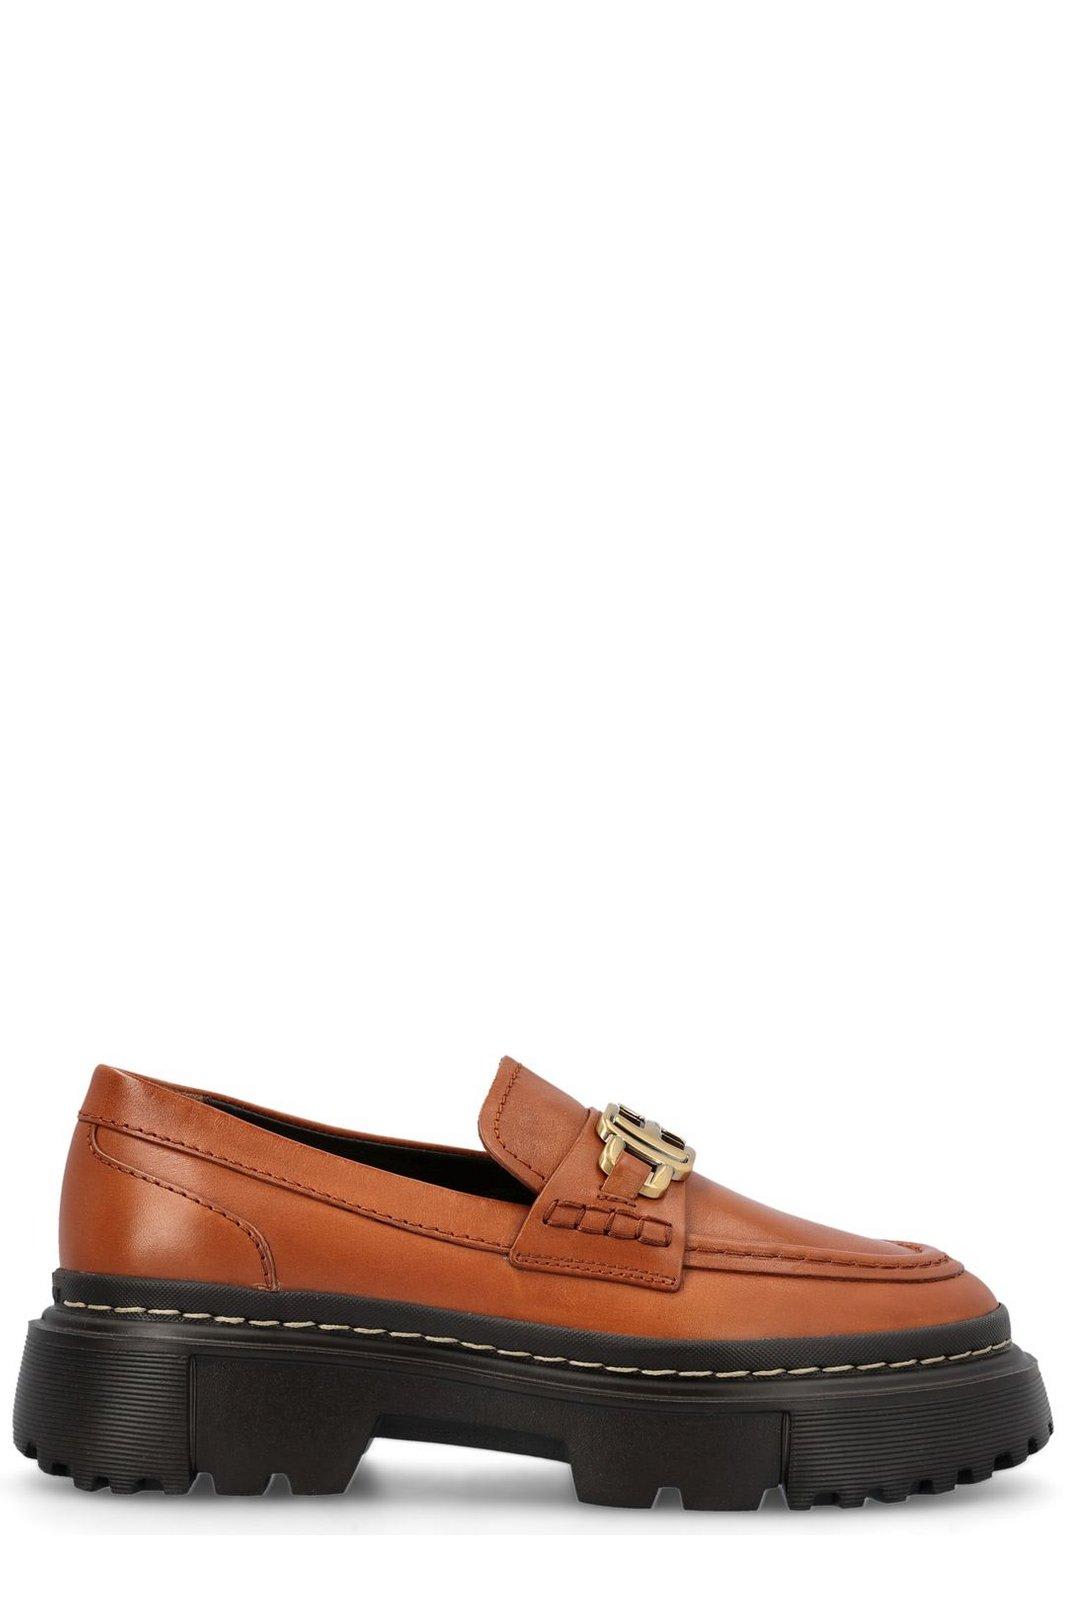 Shop Hogan H619 Slip-on Loafers  In Luggage